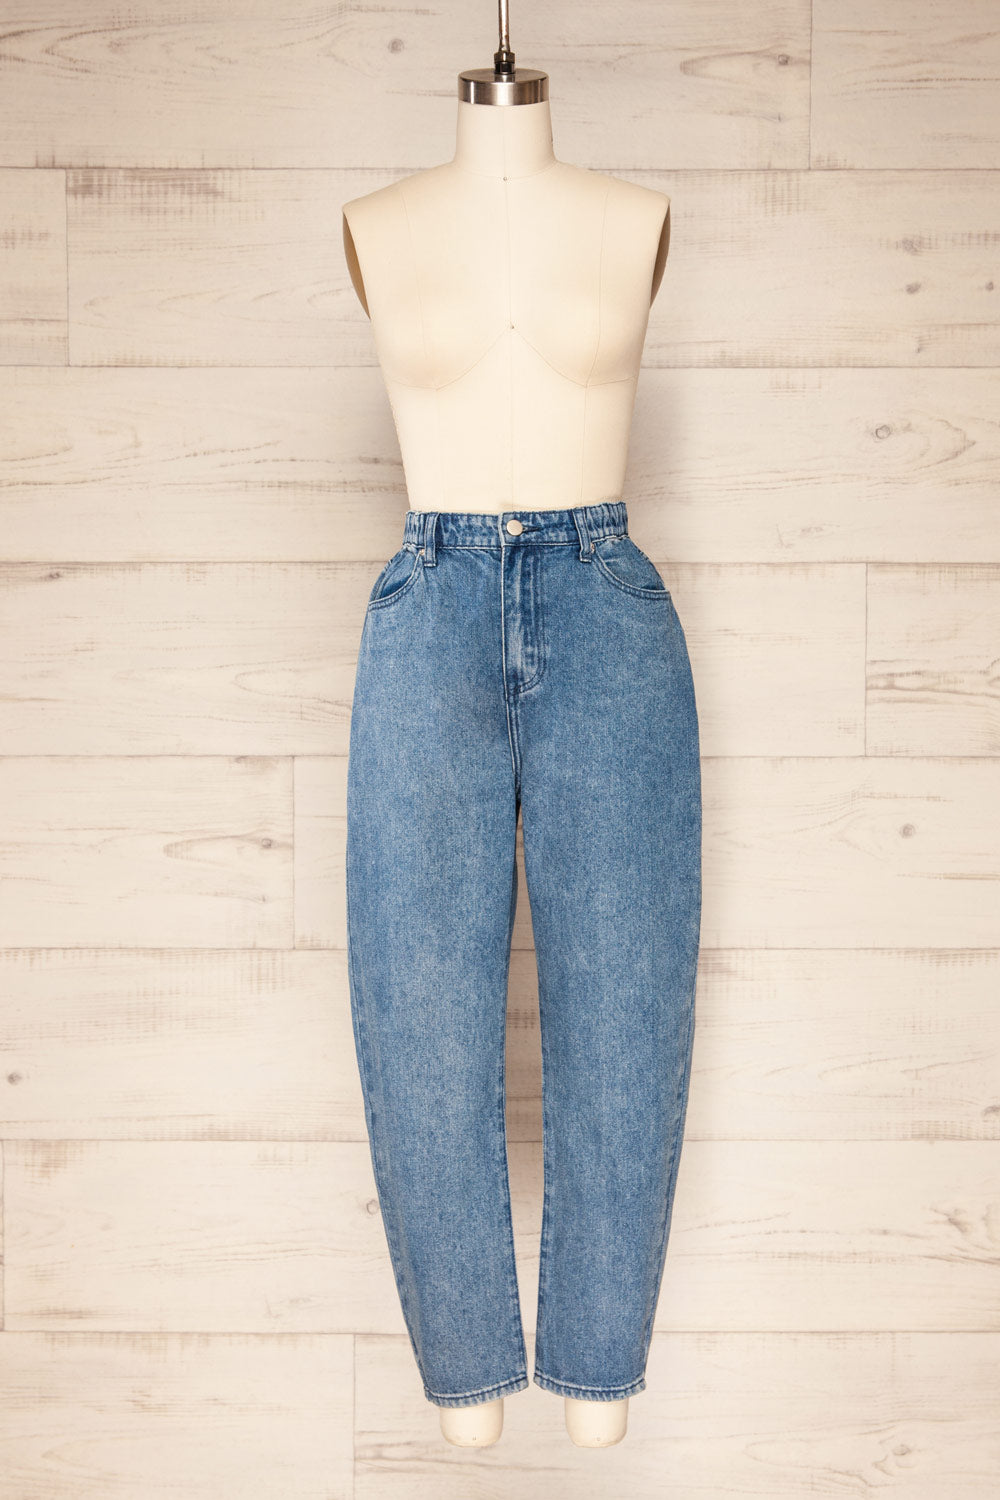 The Lee Jeans With an Elastic Waistband Fit Perfectly